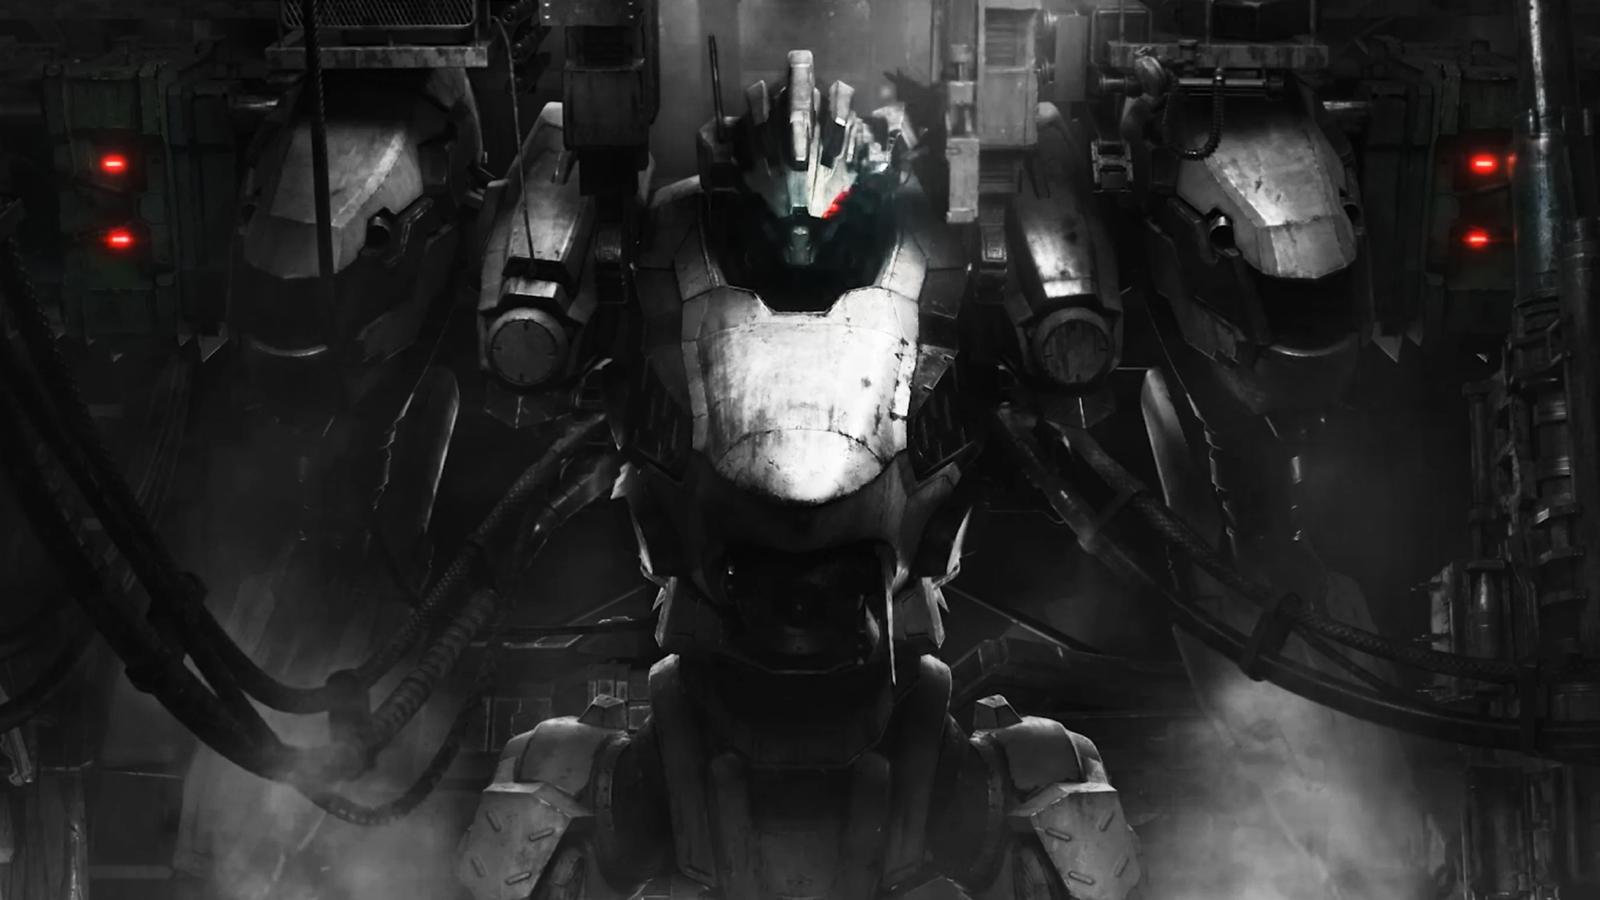 Armored Core 6 is not a sequel or open world says From Software